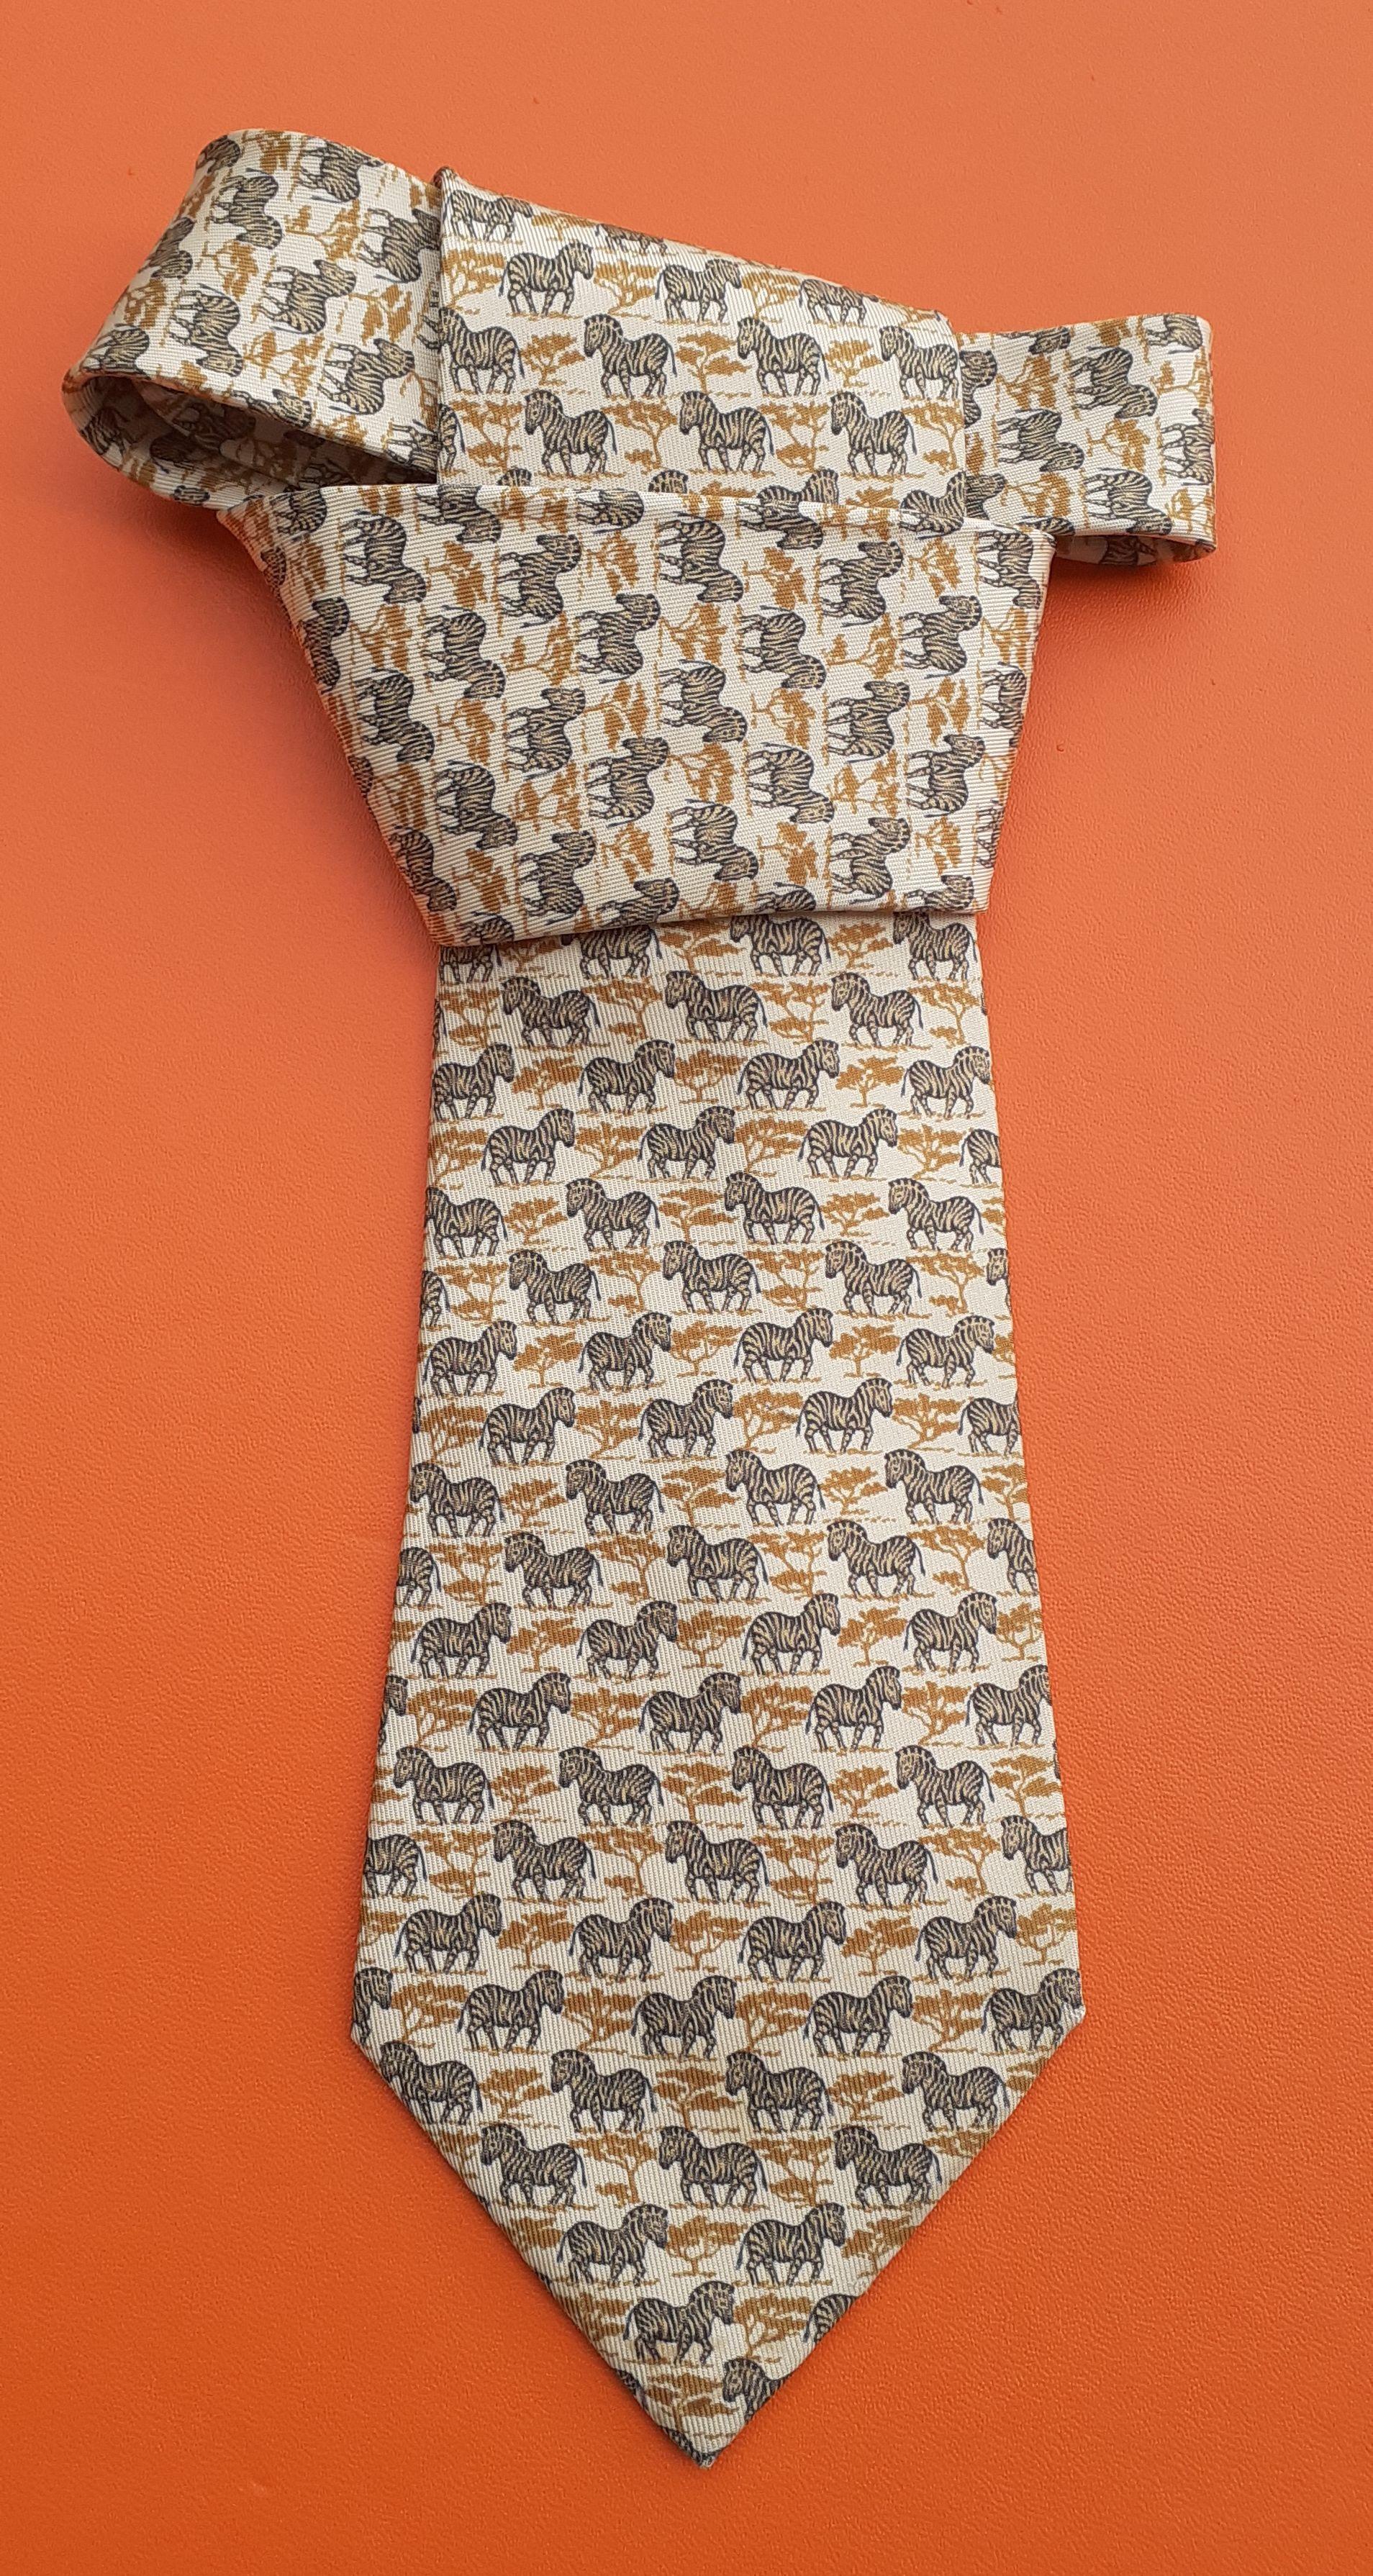 Beautiful Authentic Hermès Tie

Print: zebras in the savannah

Made in France

Made of 100% Silk

Colorways: Pale Yellow, Ocher, Black

Lined with plain pale yellow silk

